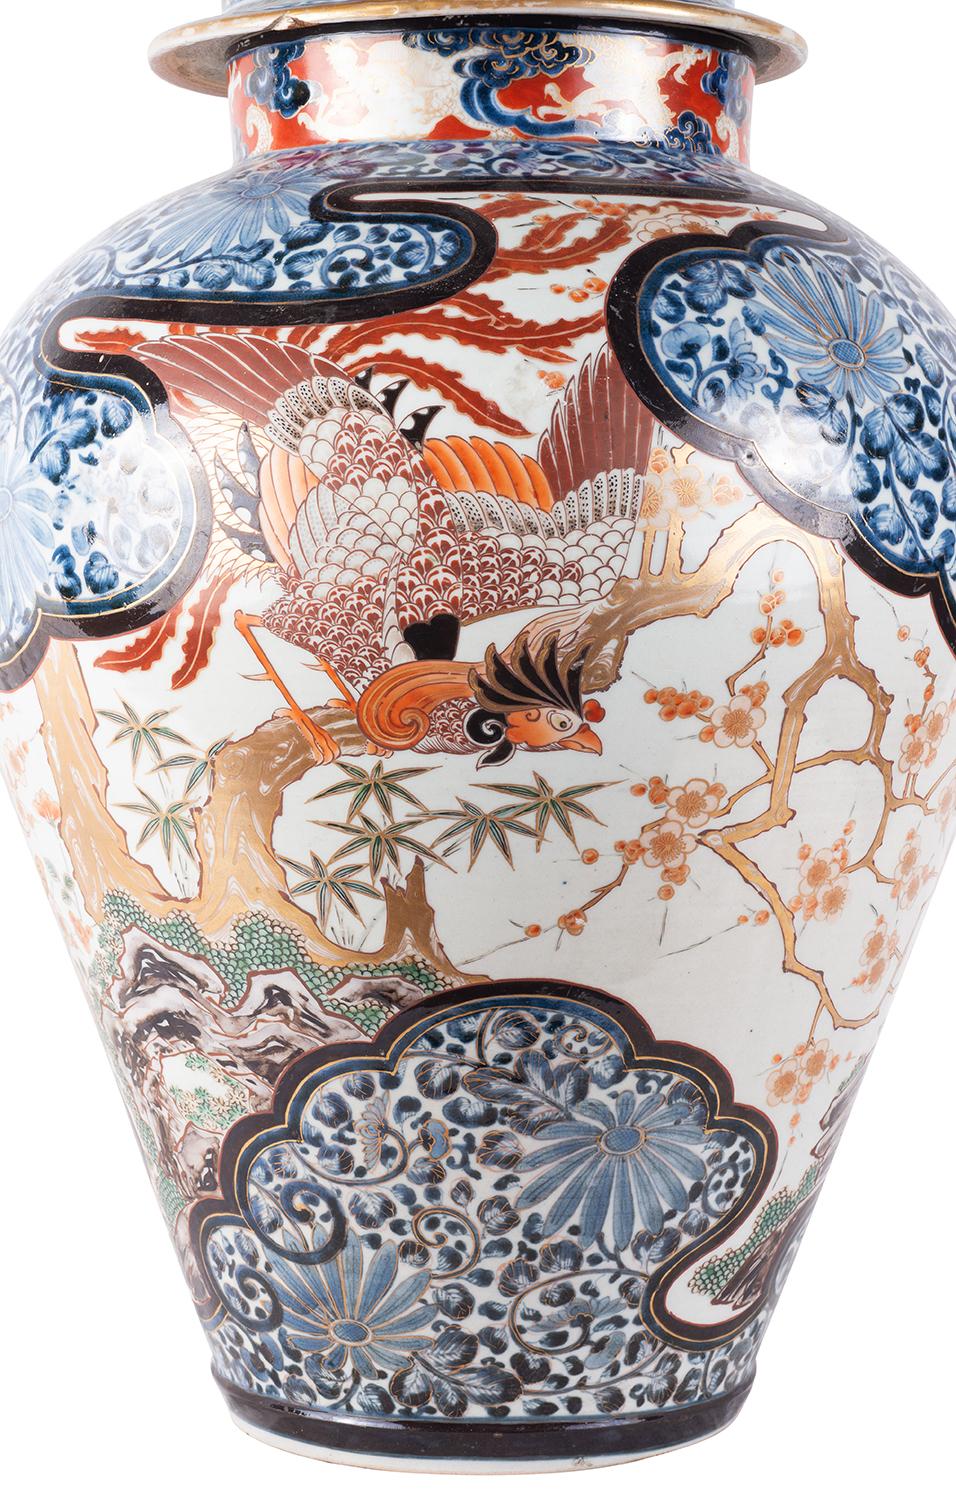 A very impressive 18th century Japanese Imari lidded vase, having a mythical dog of Foo finial to the rounded lid, the classical blue and orange ground, with exotic flowers and scrolling motif decoration. The inset hand painted panel depicting